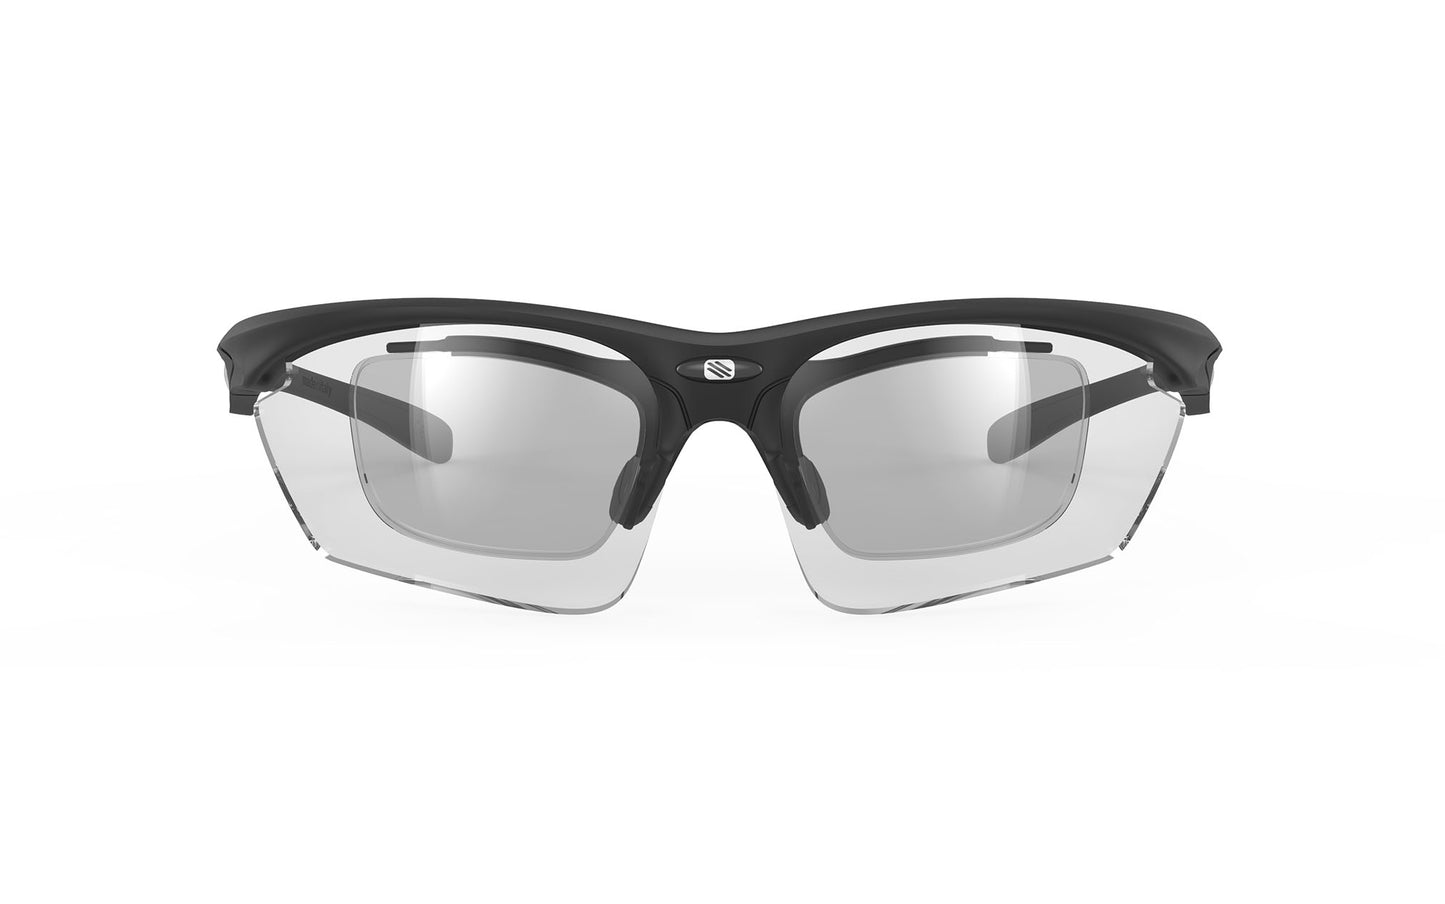 Rudy Project Performance Eyewear Optical Insert for Biking, Cycling and Sports